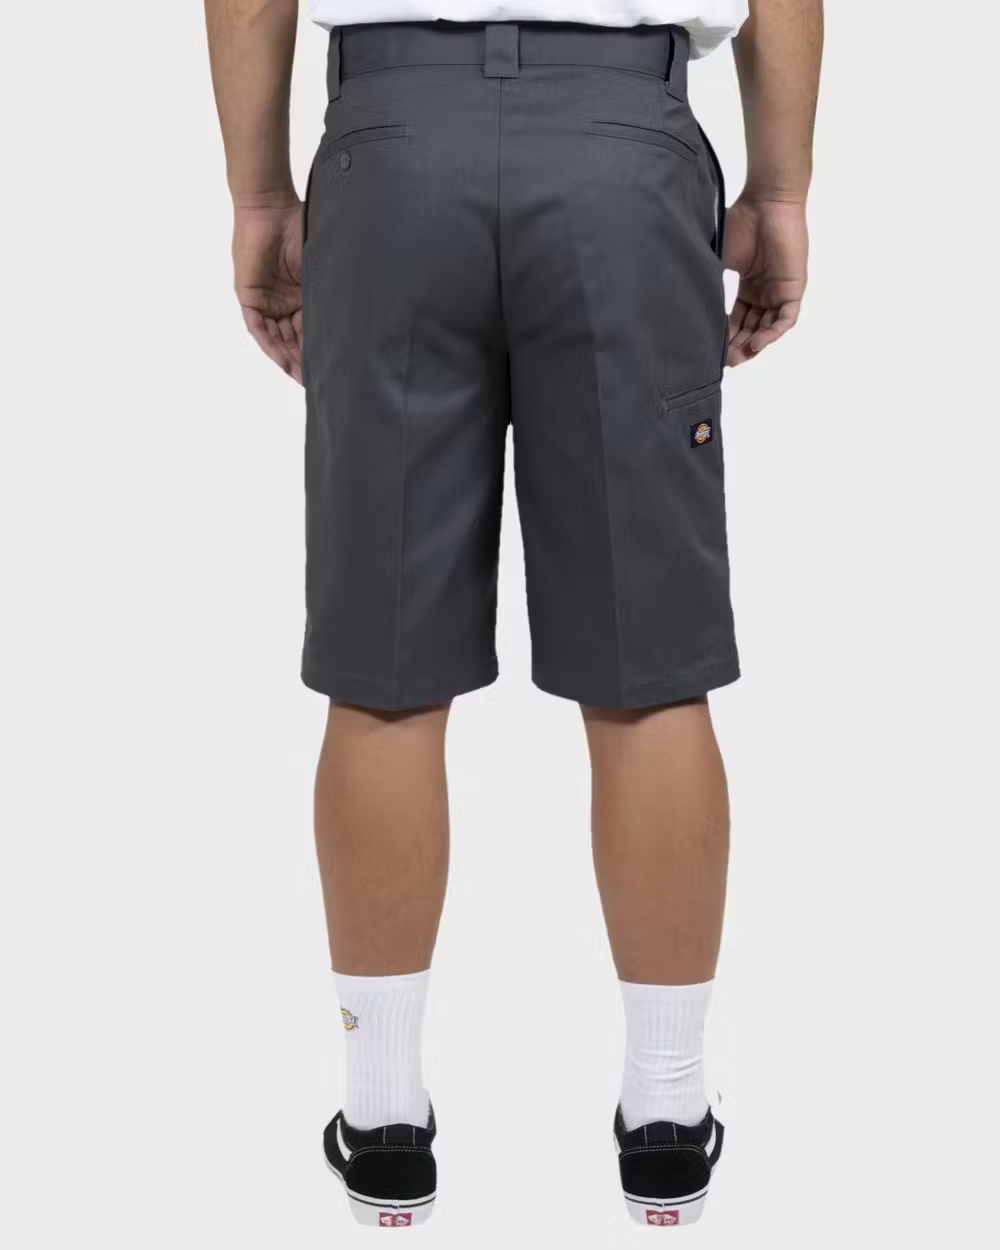 DICKIES 131 Slim Straight Fit Shorts - Charcoal - VENUE.